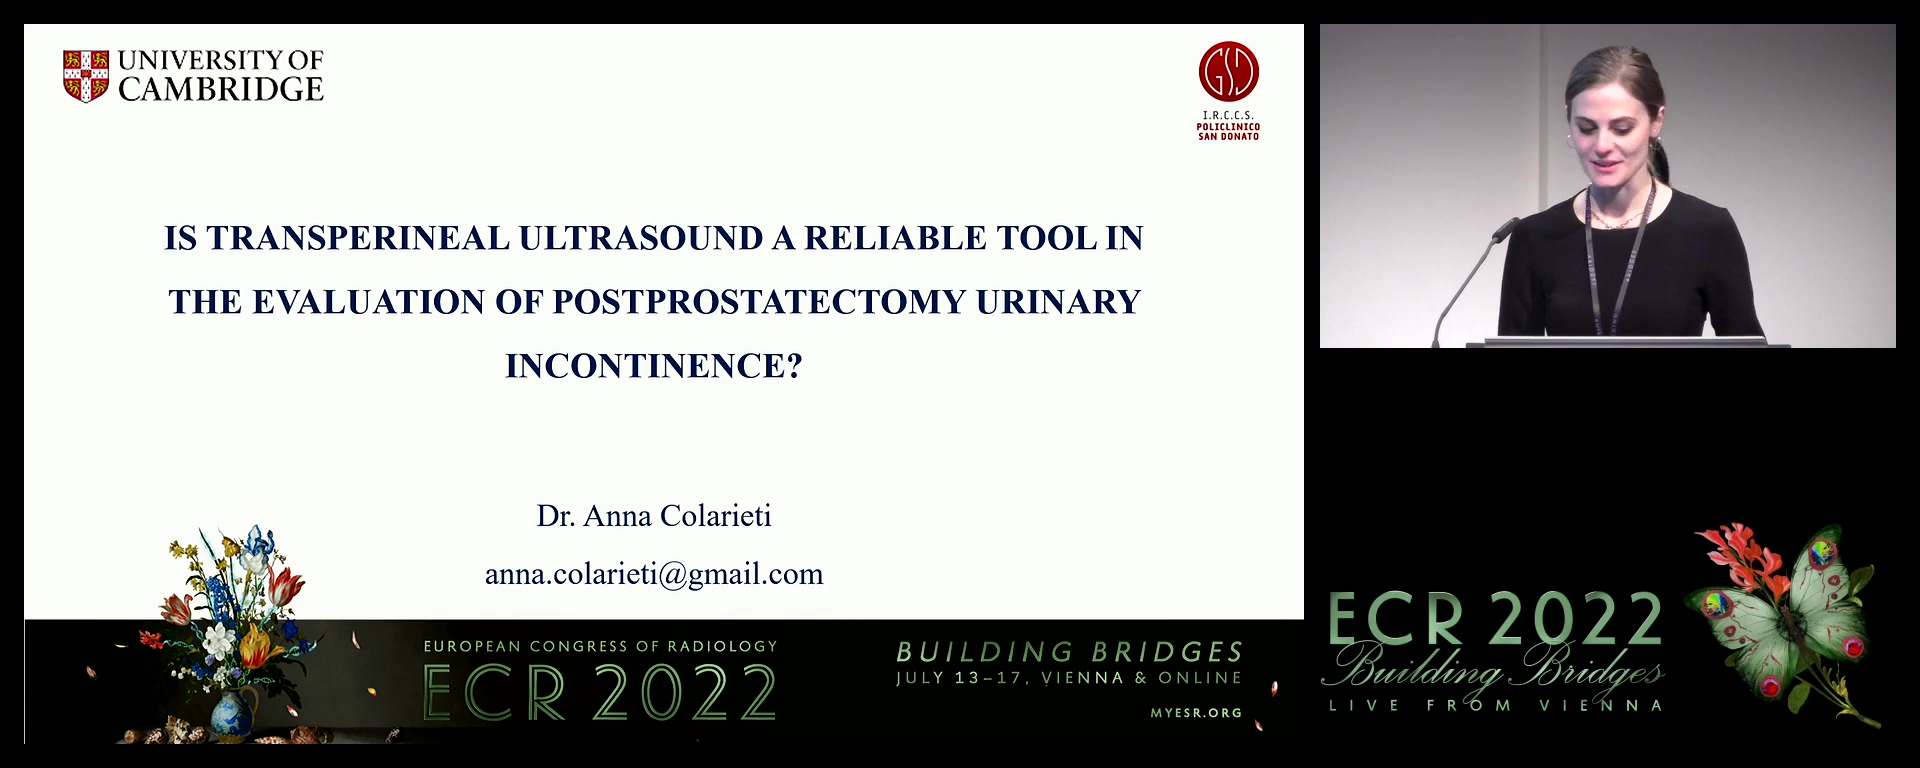 Is transperineal ultrasound a reliable tool in the evaluation of postprostatectomy urinary incontinence? - Anna Colarieti, MIlano / IT